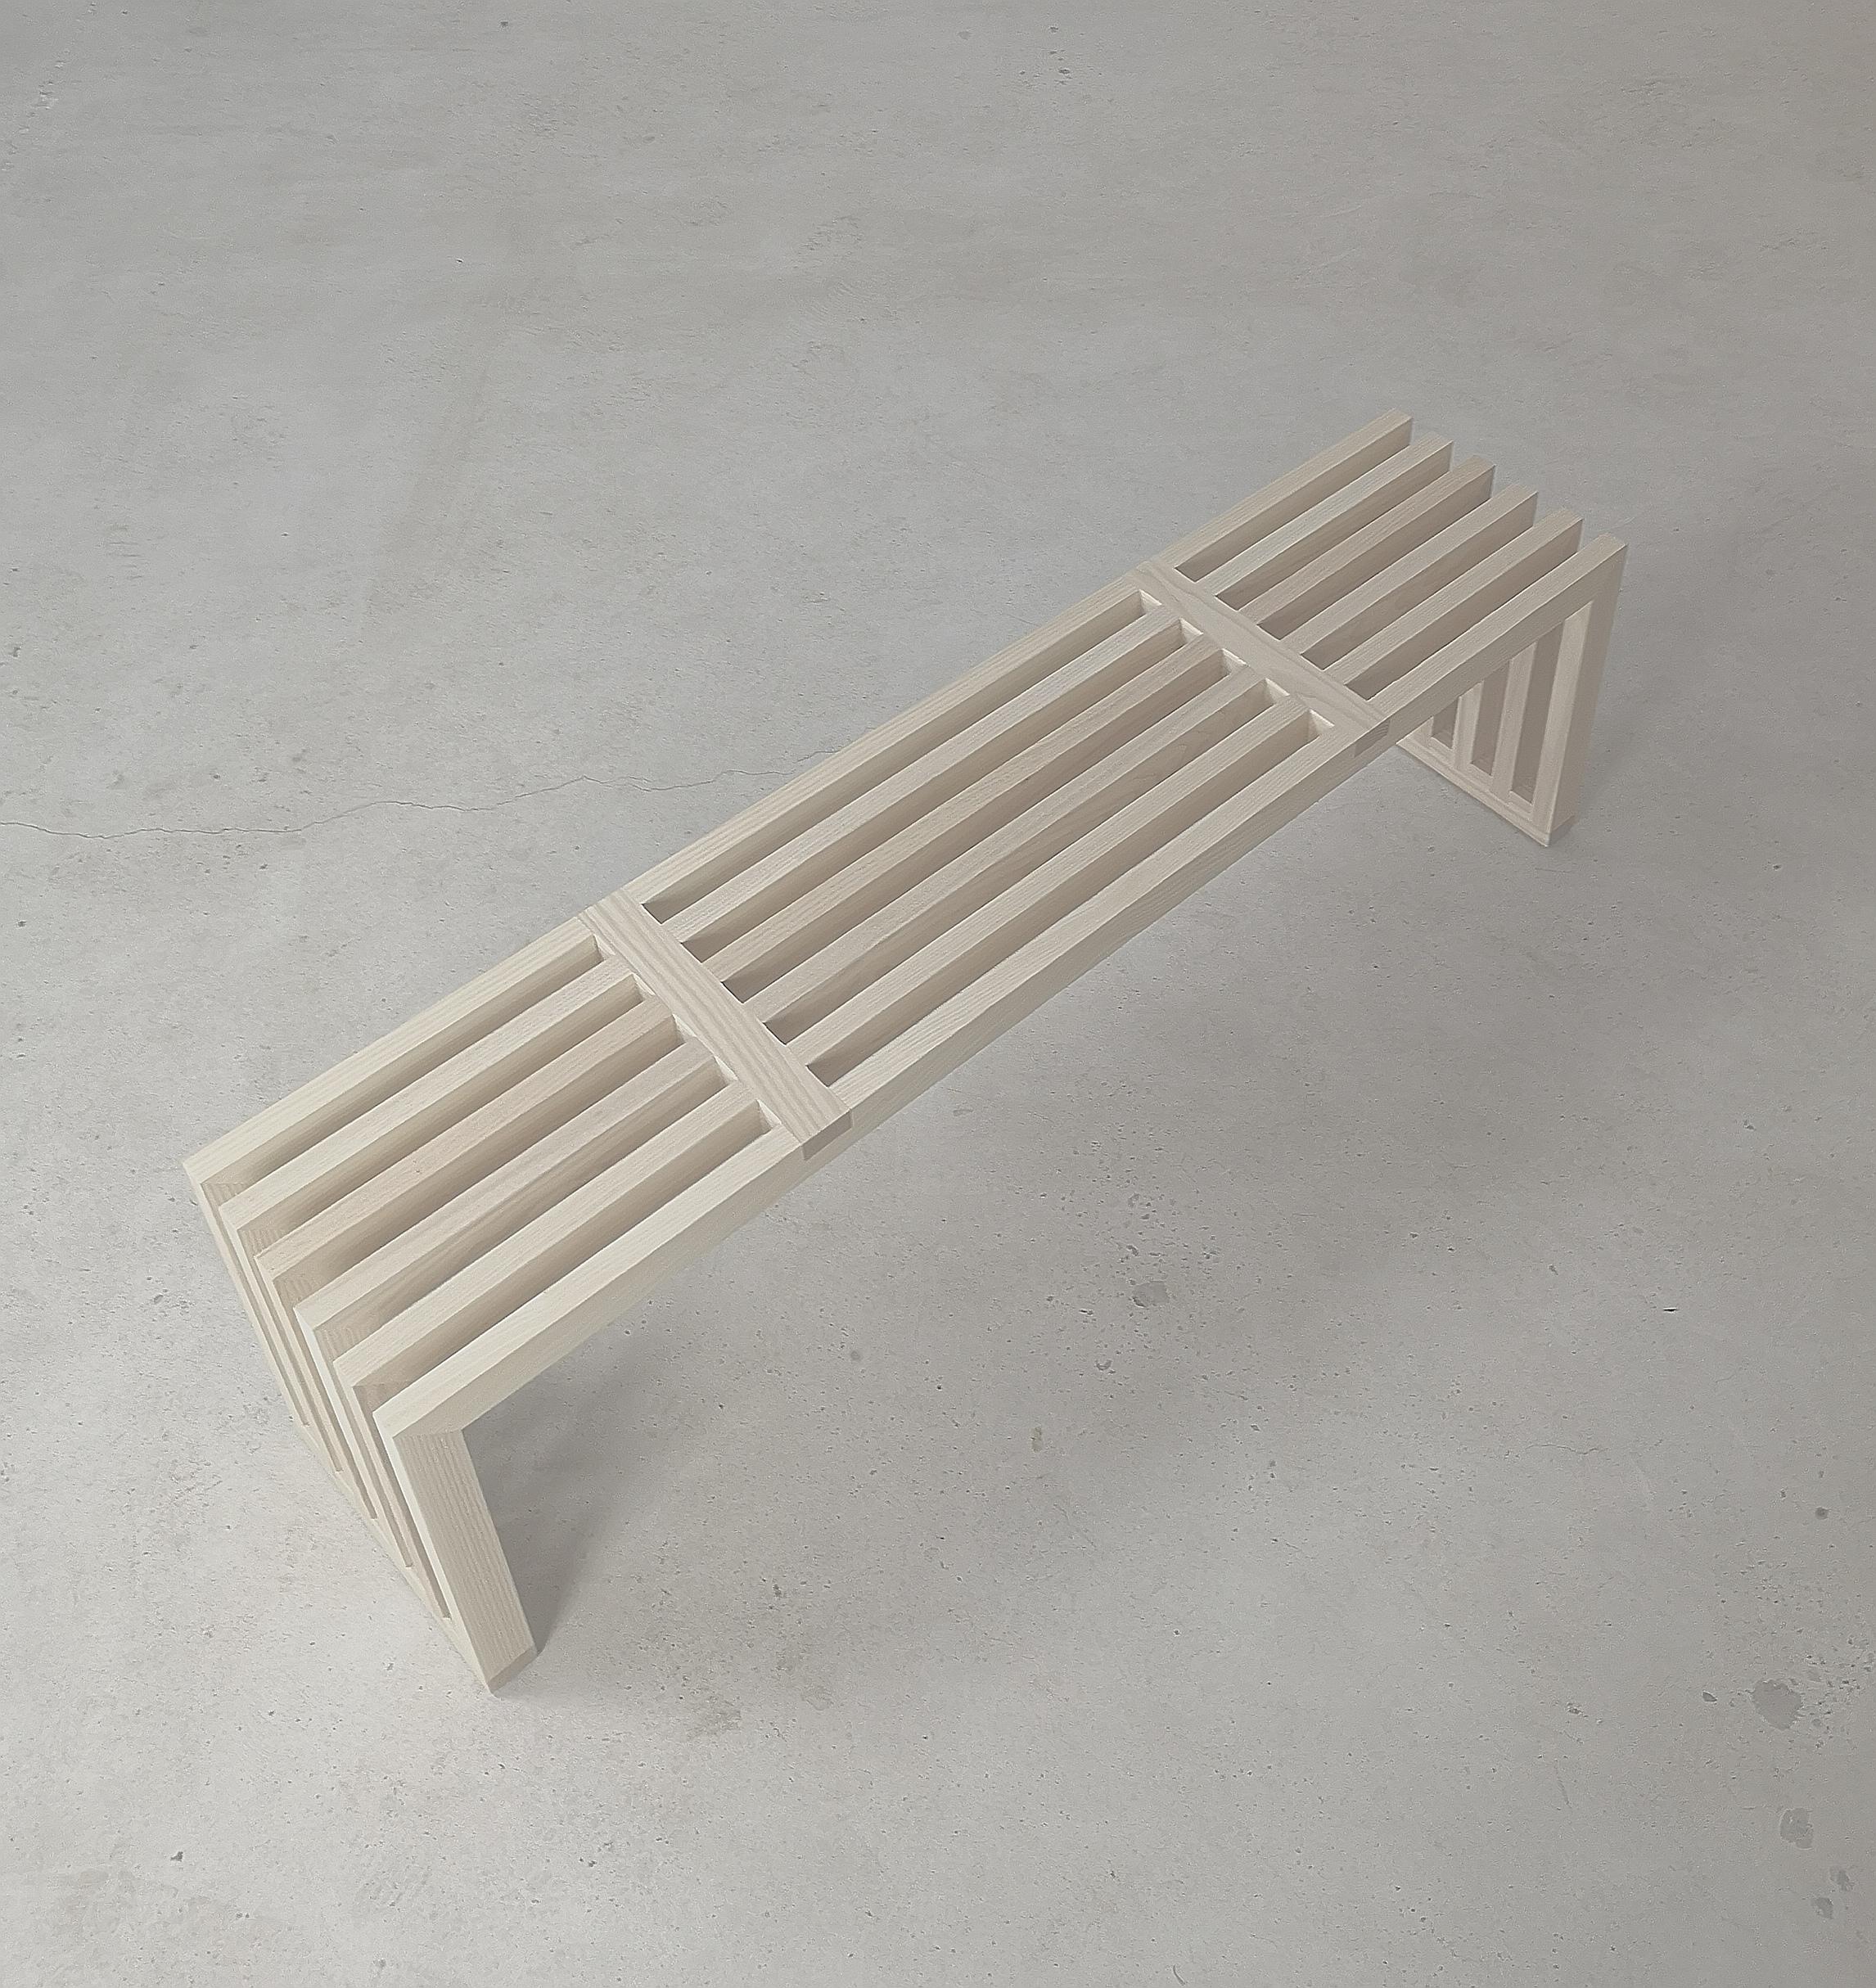 Hypnotizm is the perfect bench for entryway, foot of your bed, additional dining room seating, or as a hall table. With an obvious nod to George Nelson, this slatted bench is visually light but impactful. Height, width, and length are all